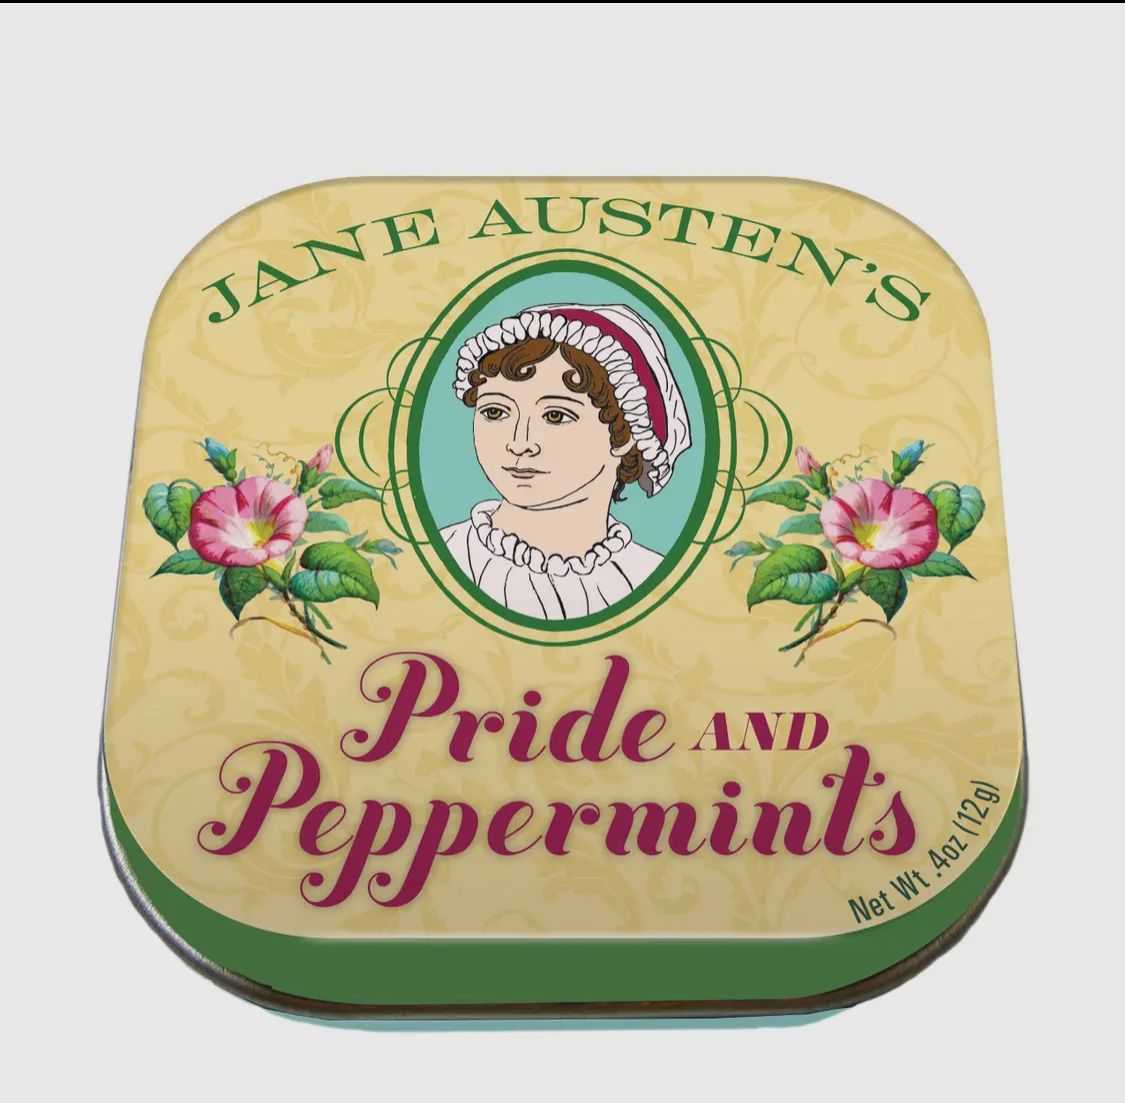 Pride Peppermints at Meadowlark Bakery & Cafe in WARMINSTER, PA 18974 | YourMenu Online Ordering